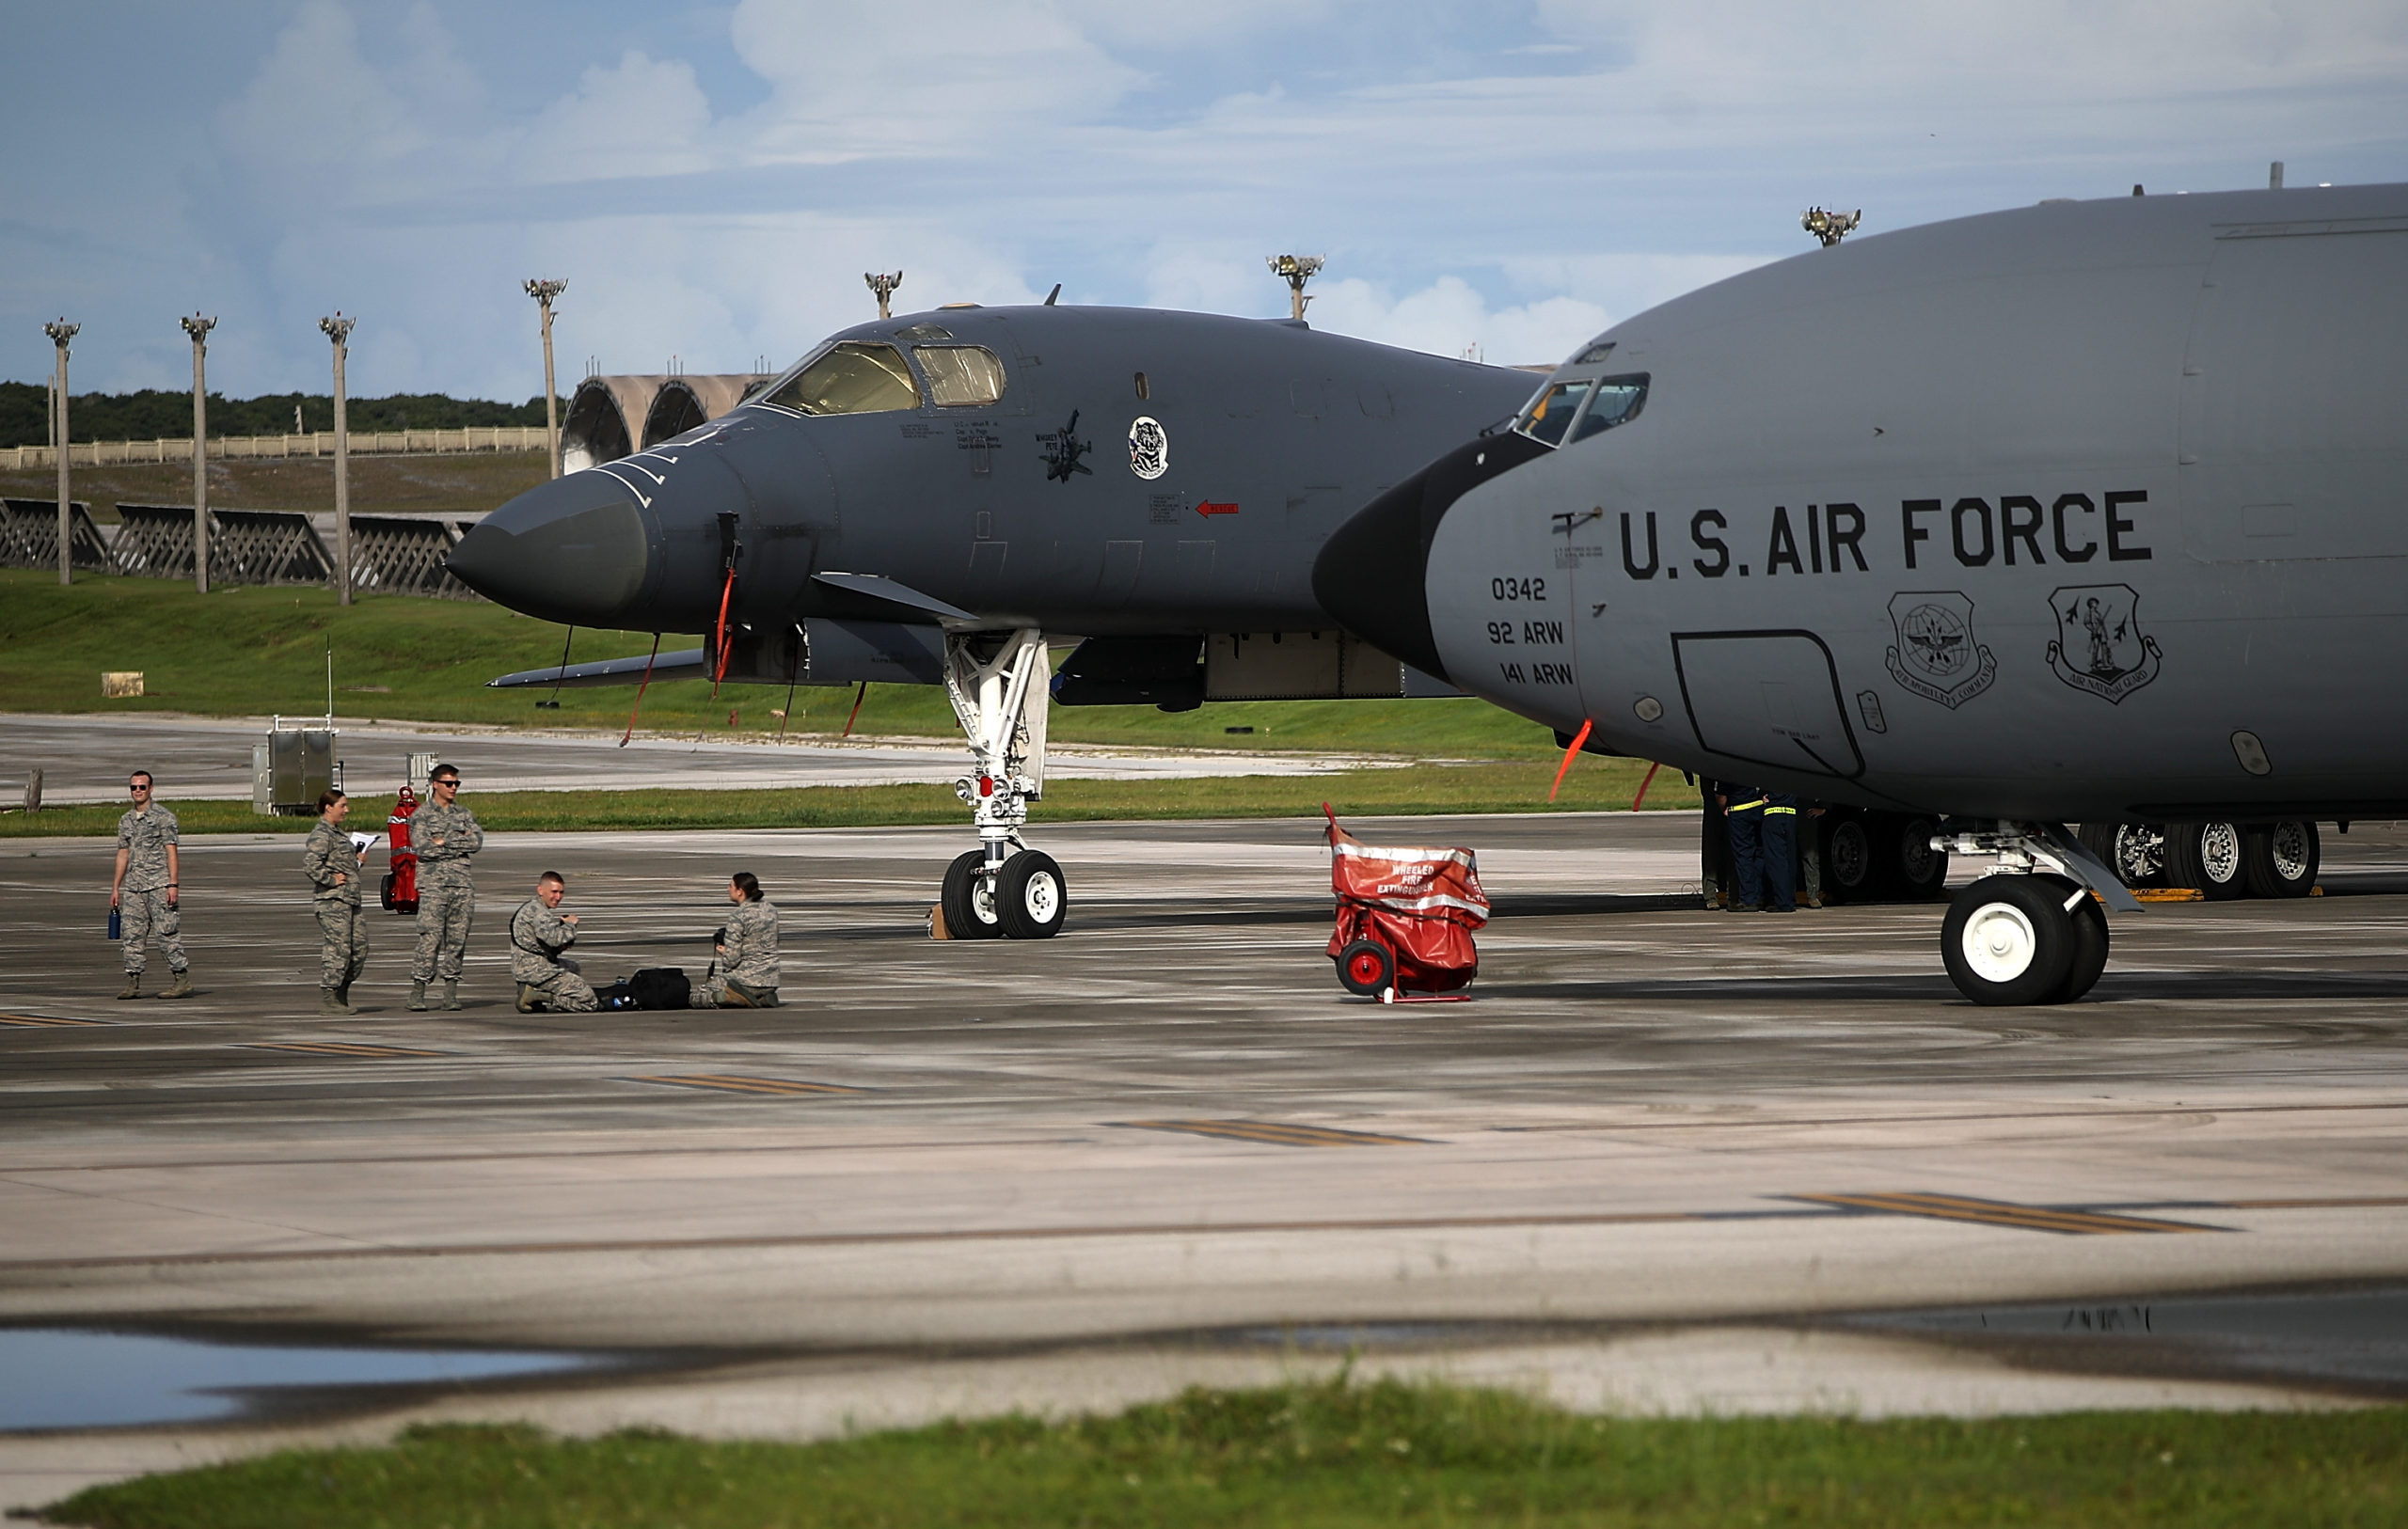 YIGO, GUAM - AUGUST 17: A U.S. Air Force Rockwell B-1B Lancer (L) and a Boeing KC-135 Stratotanker (R) sit on the tarmac at Andersen Air Force base on August 17, 2017 in Yigo, Guam. The American territory of Guam remains on high alert as a showdown between the U.S. and North Korea continues. North Korea has said that it is planning to launch four missiles near Guam by the middle of August. Guam home to about 7,000 American troops and 160,000 residents. (Photo by Justin Sullivan/Getty Images)